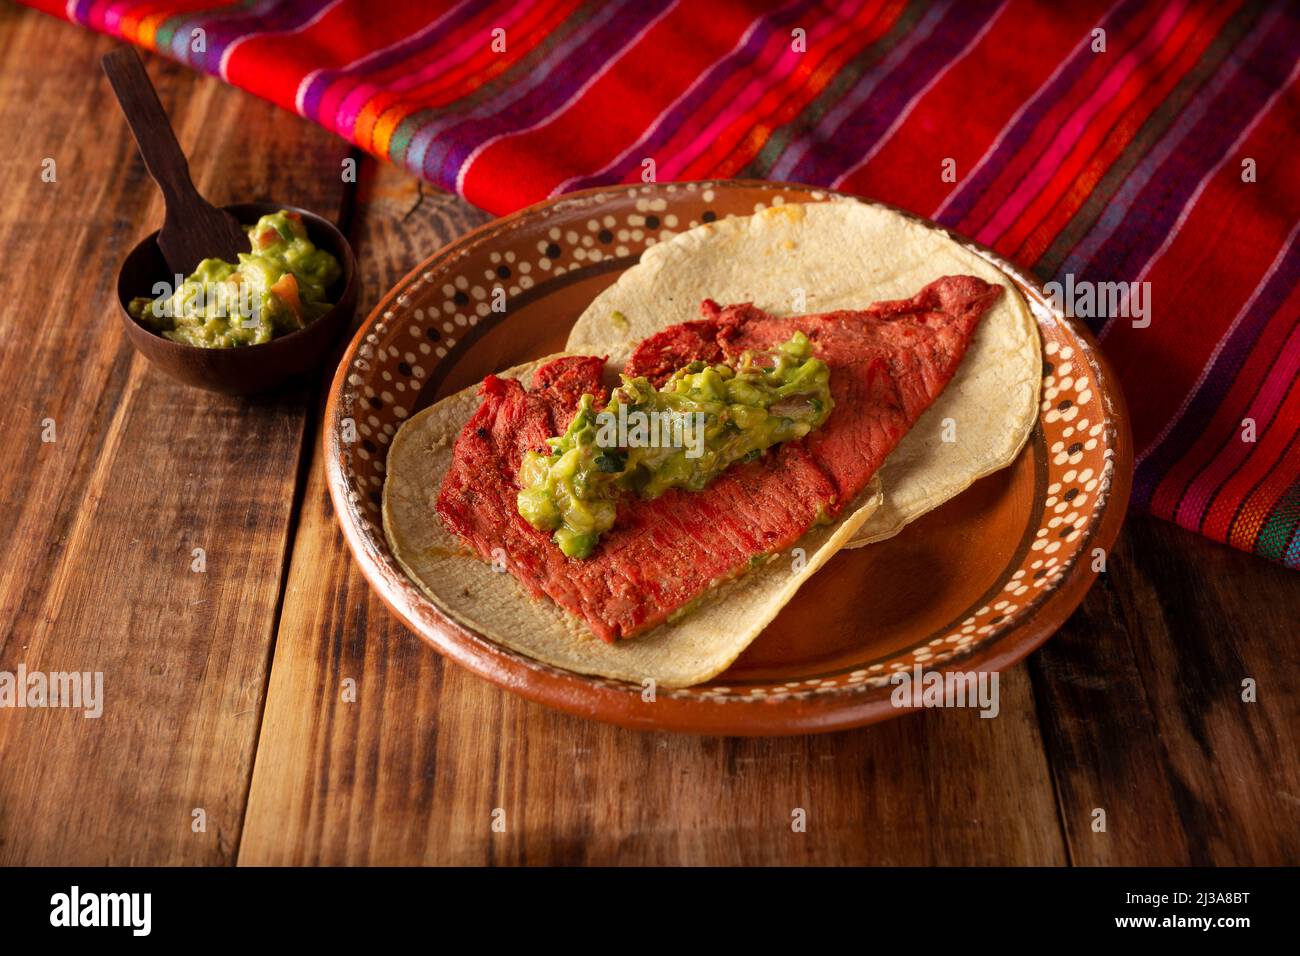 Tacos de Cecina Enchilada con Guacamole. Salted, sun-dried pork or beef meat, seasoned with various spices and chili peppers, usually eaten in tacos Stock Photo